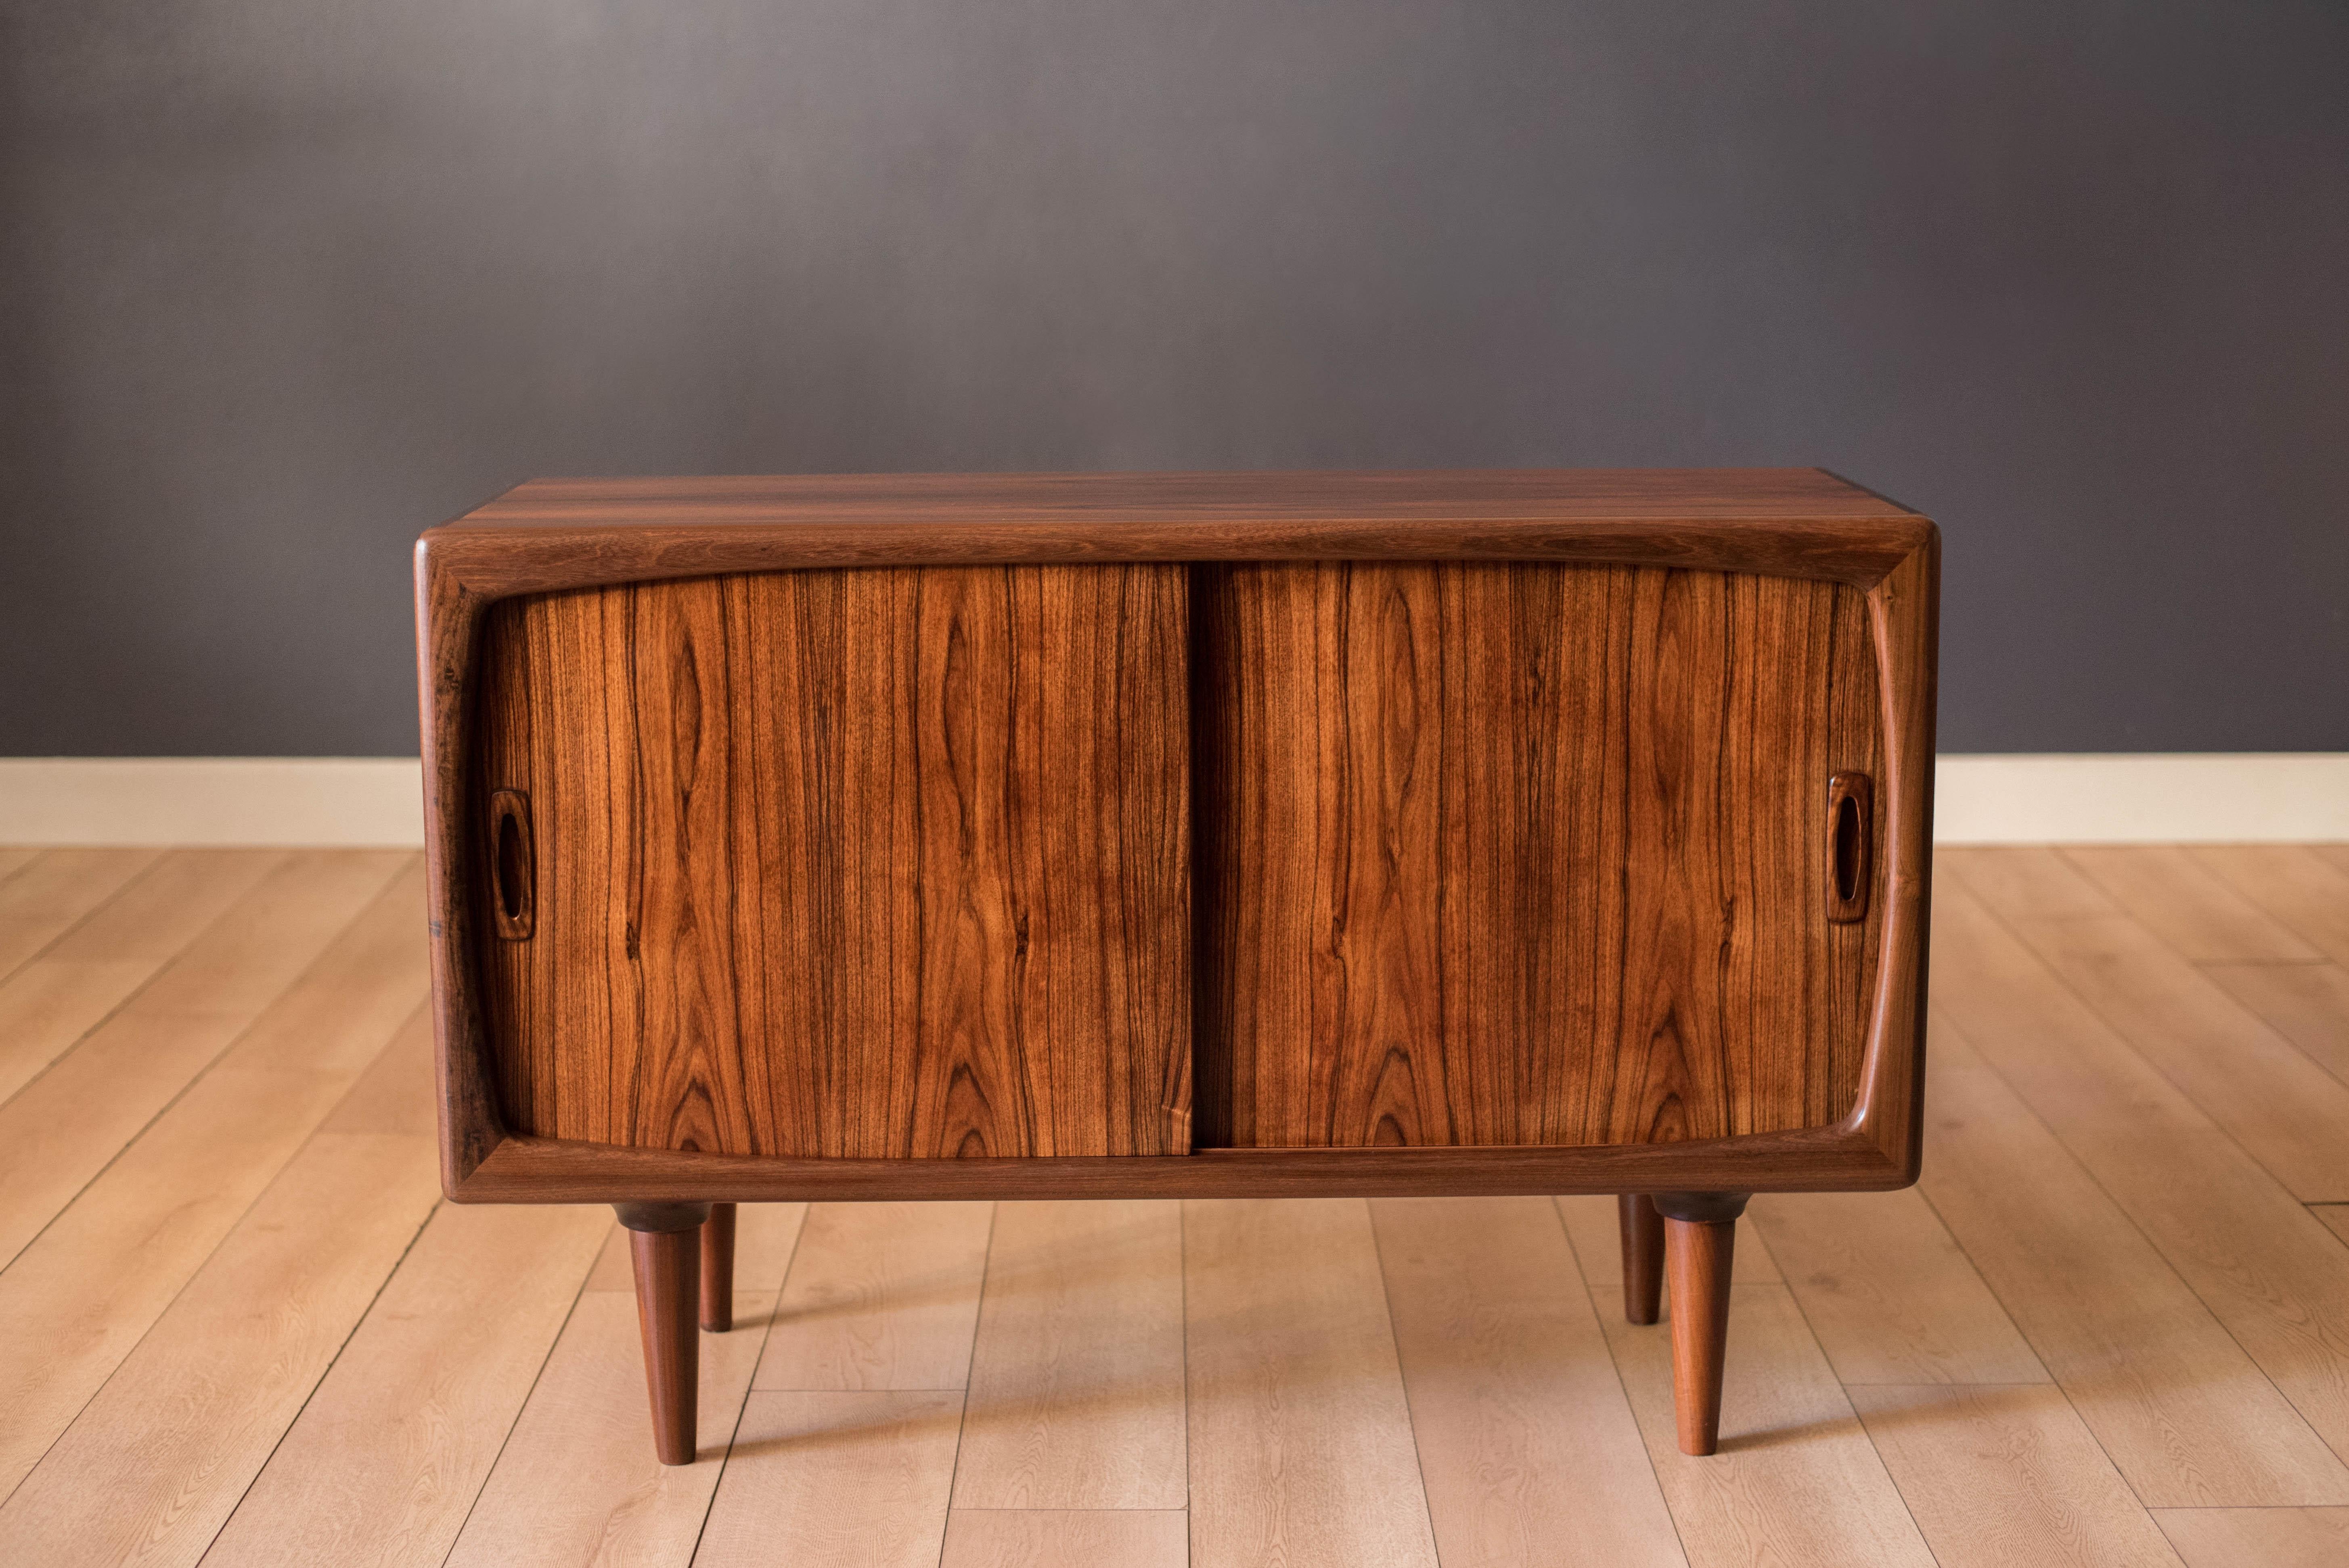 Mid-Century Modern credenza sideboard buffet by H.P. Hansen in rosewood, circa 1960s. Features solid sculpted pulls and space saving sliding doors that offer hidden storage with adjustable shelving. This versatile piece can be used as a media